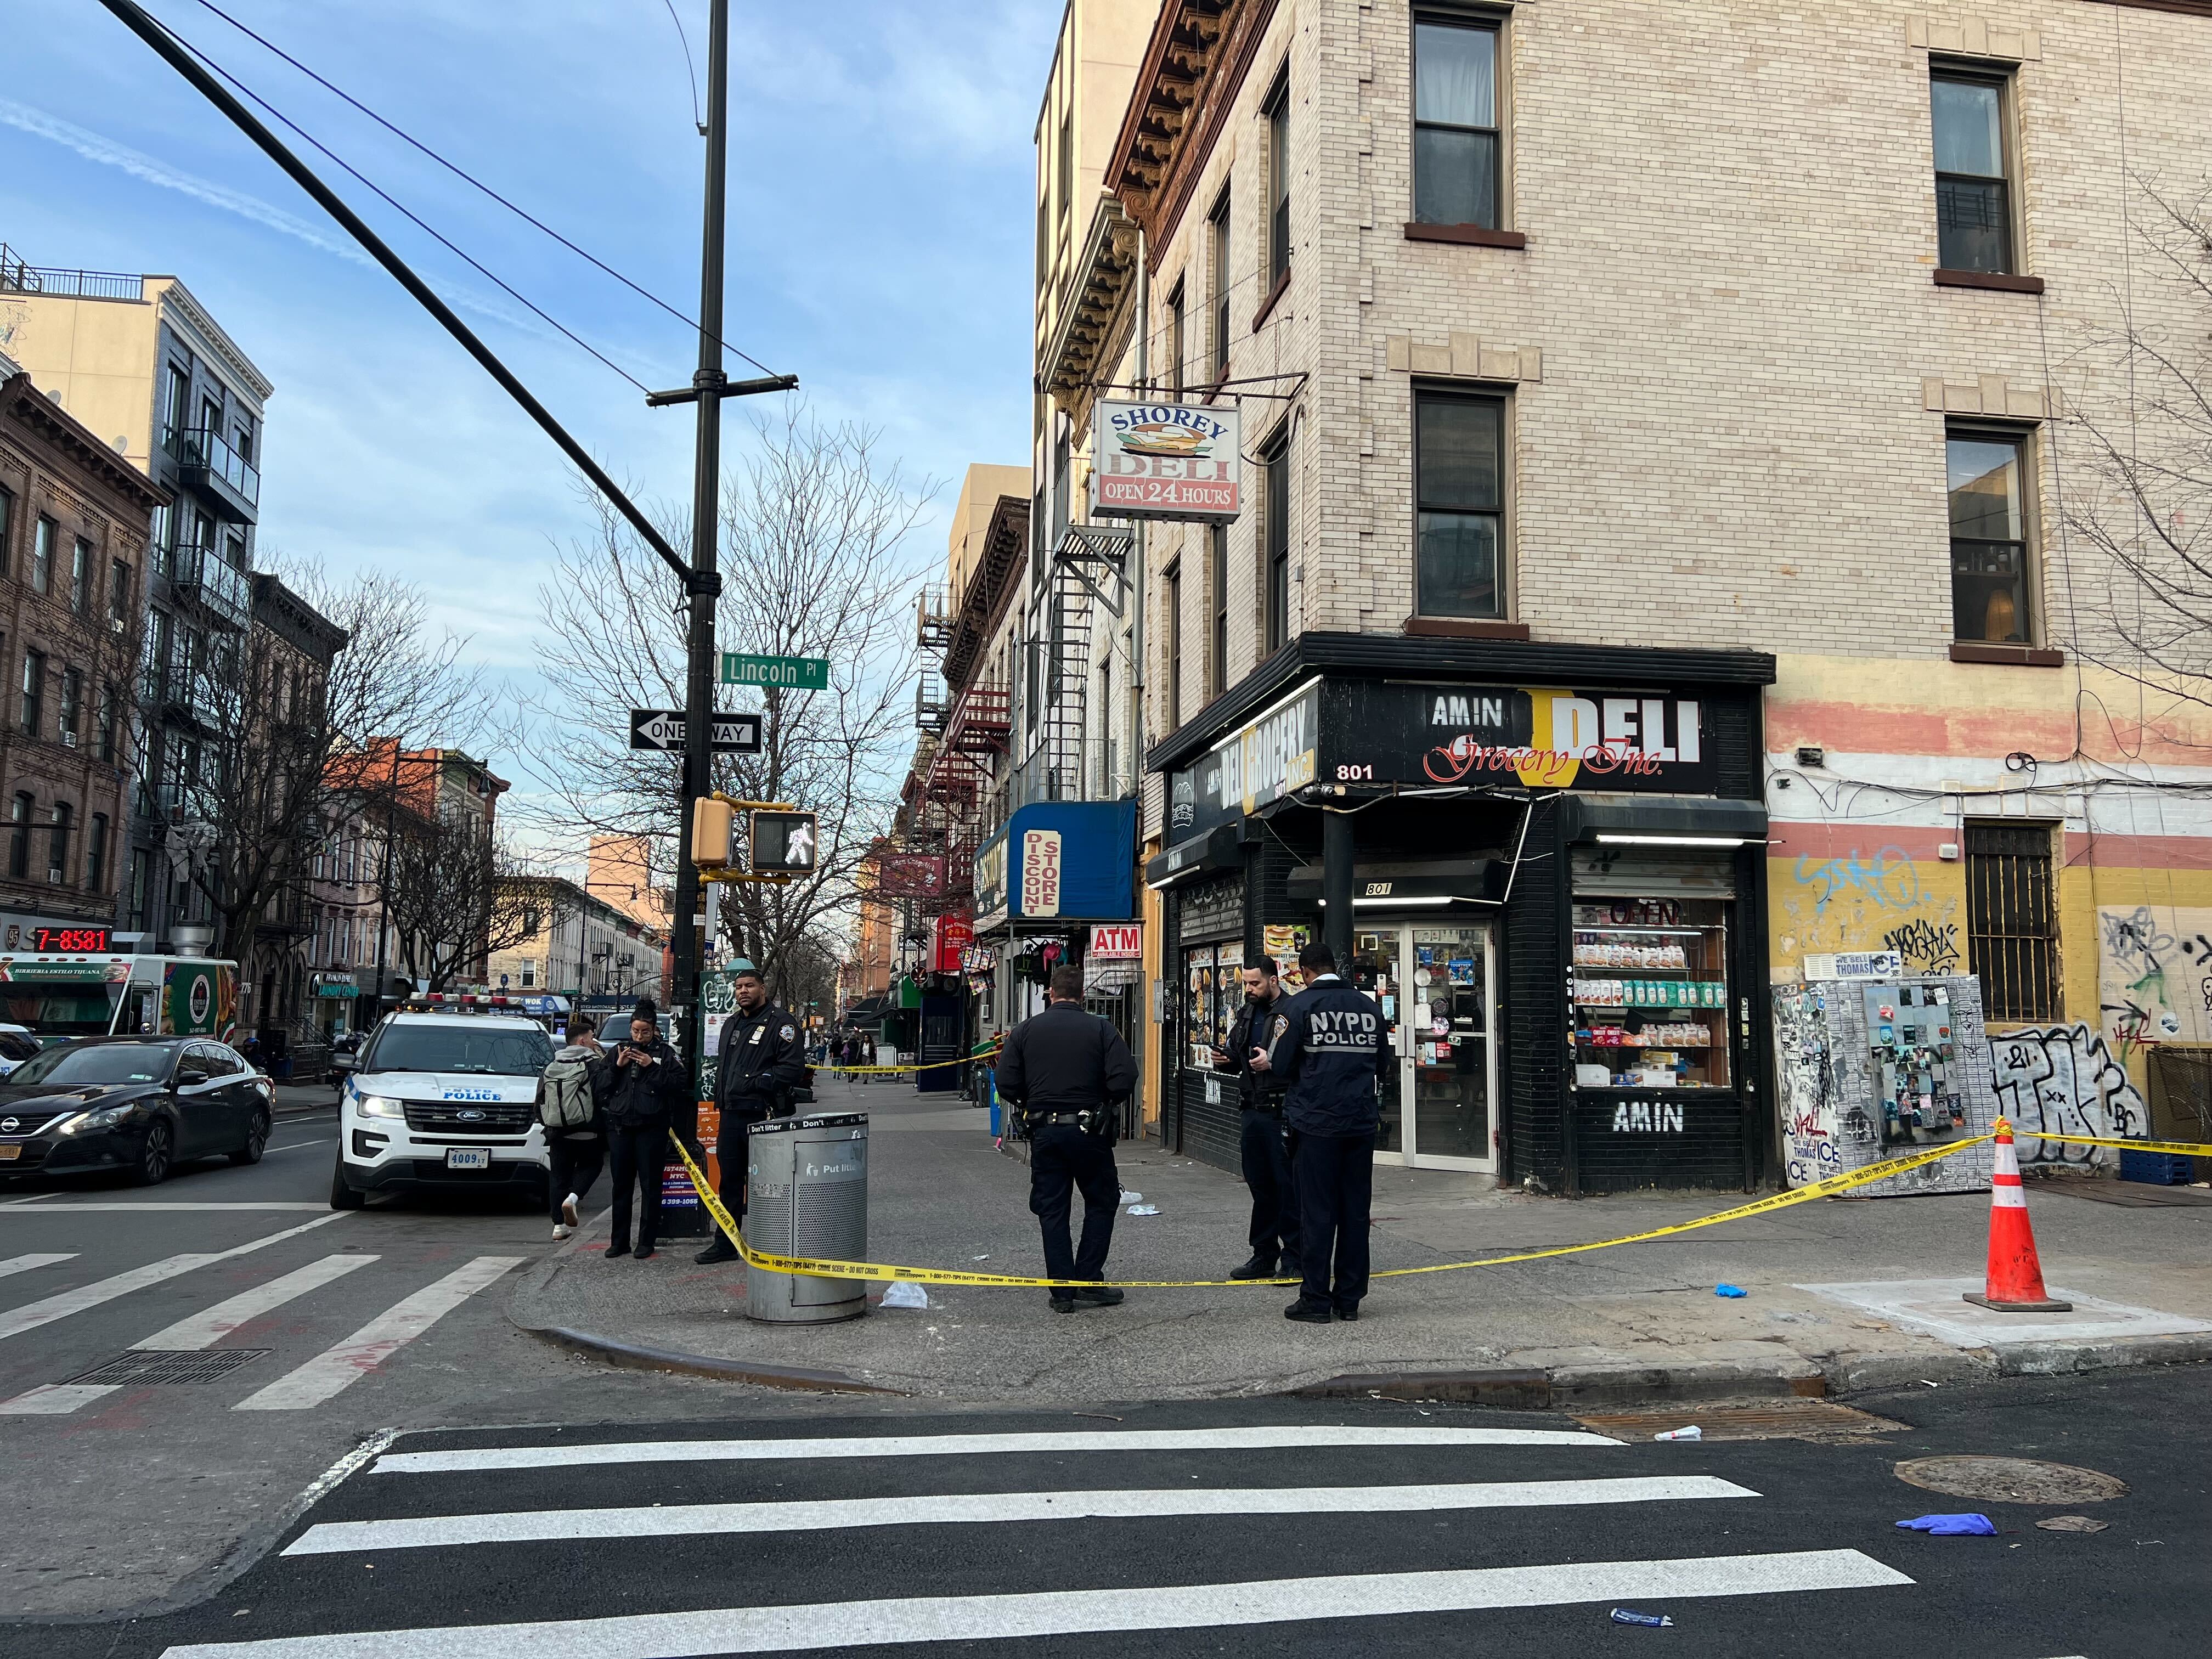 Police respond to the scene of a shooting in Brooklyn on Monday evening.